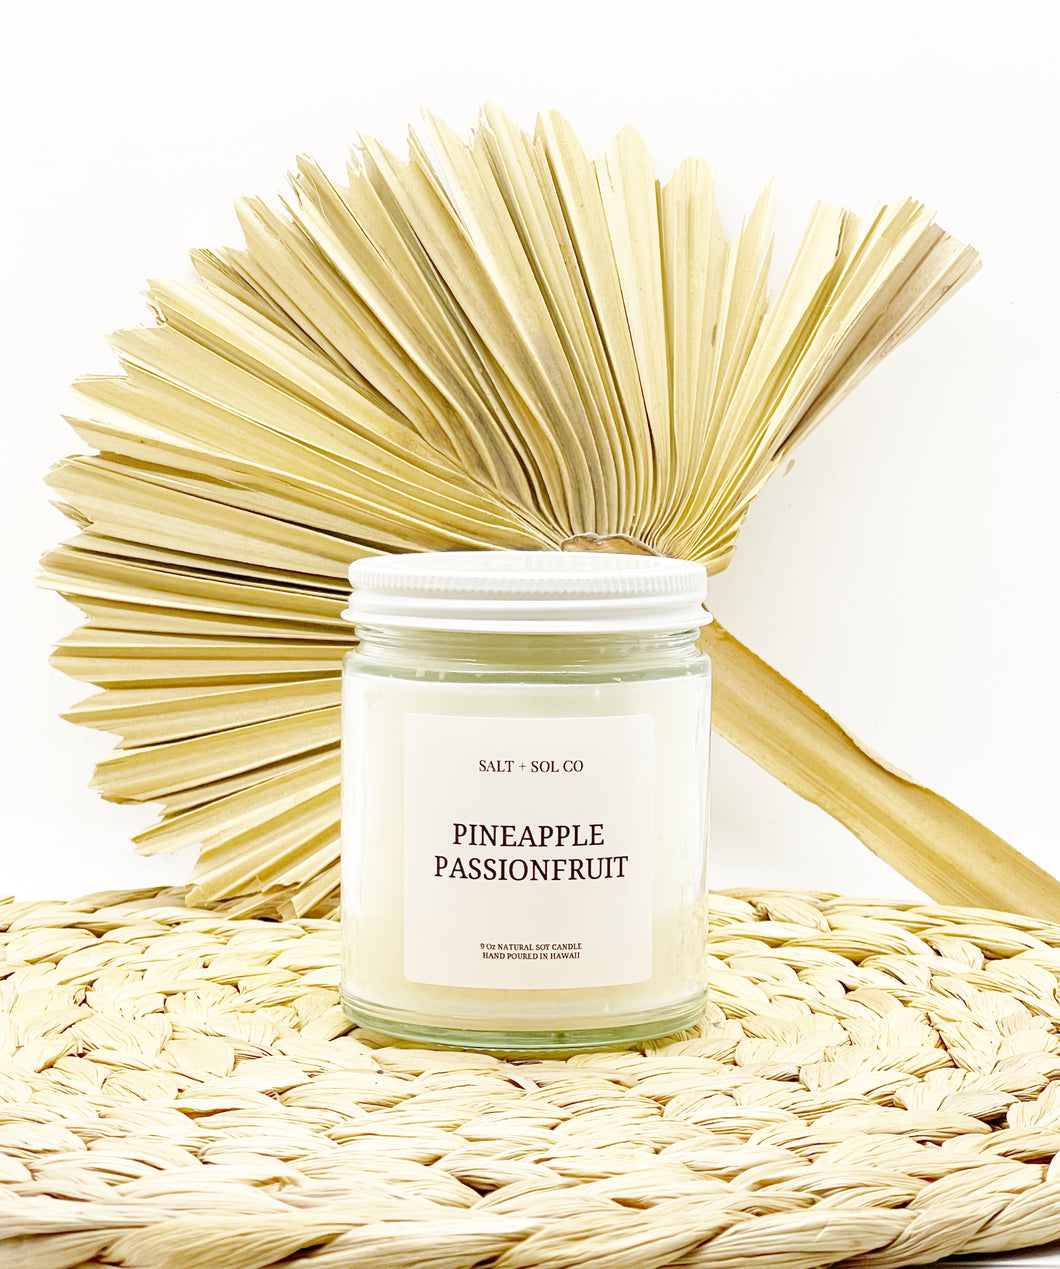 Hawaiian pineapple passionfruit candle for purchase at salt + SOL co made in Hawaii 